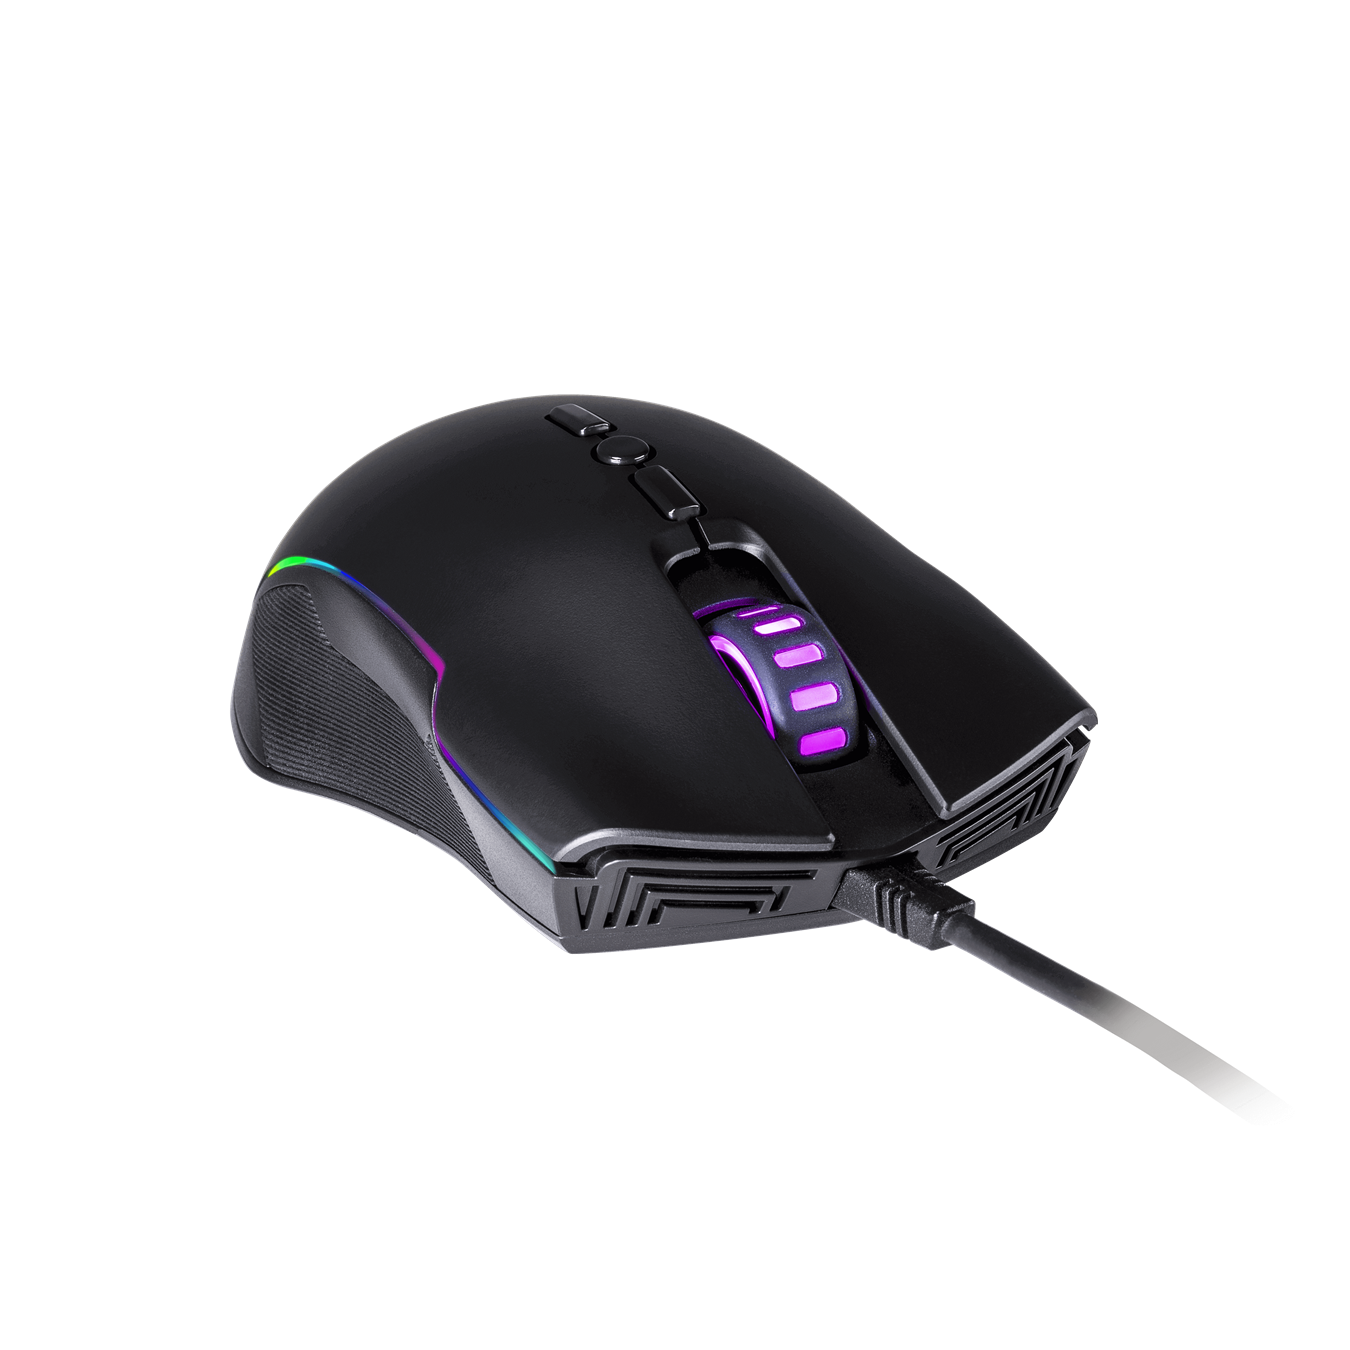 CM310 Gaming Mouse - Three top Buttonsfor added controls of DPI and profiles. 